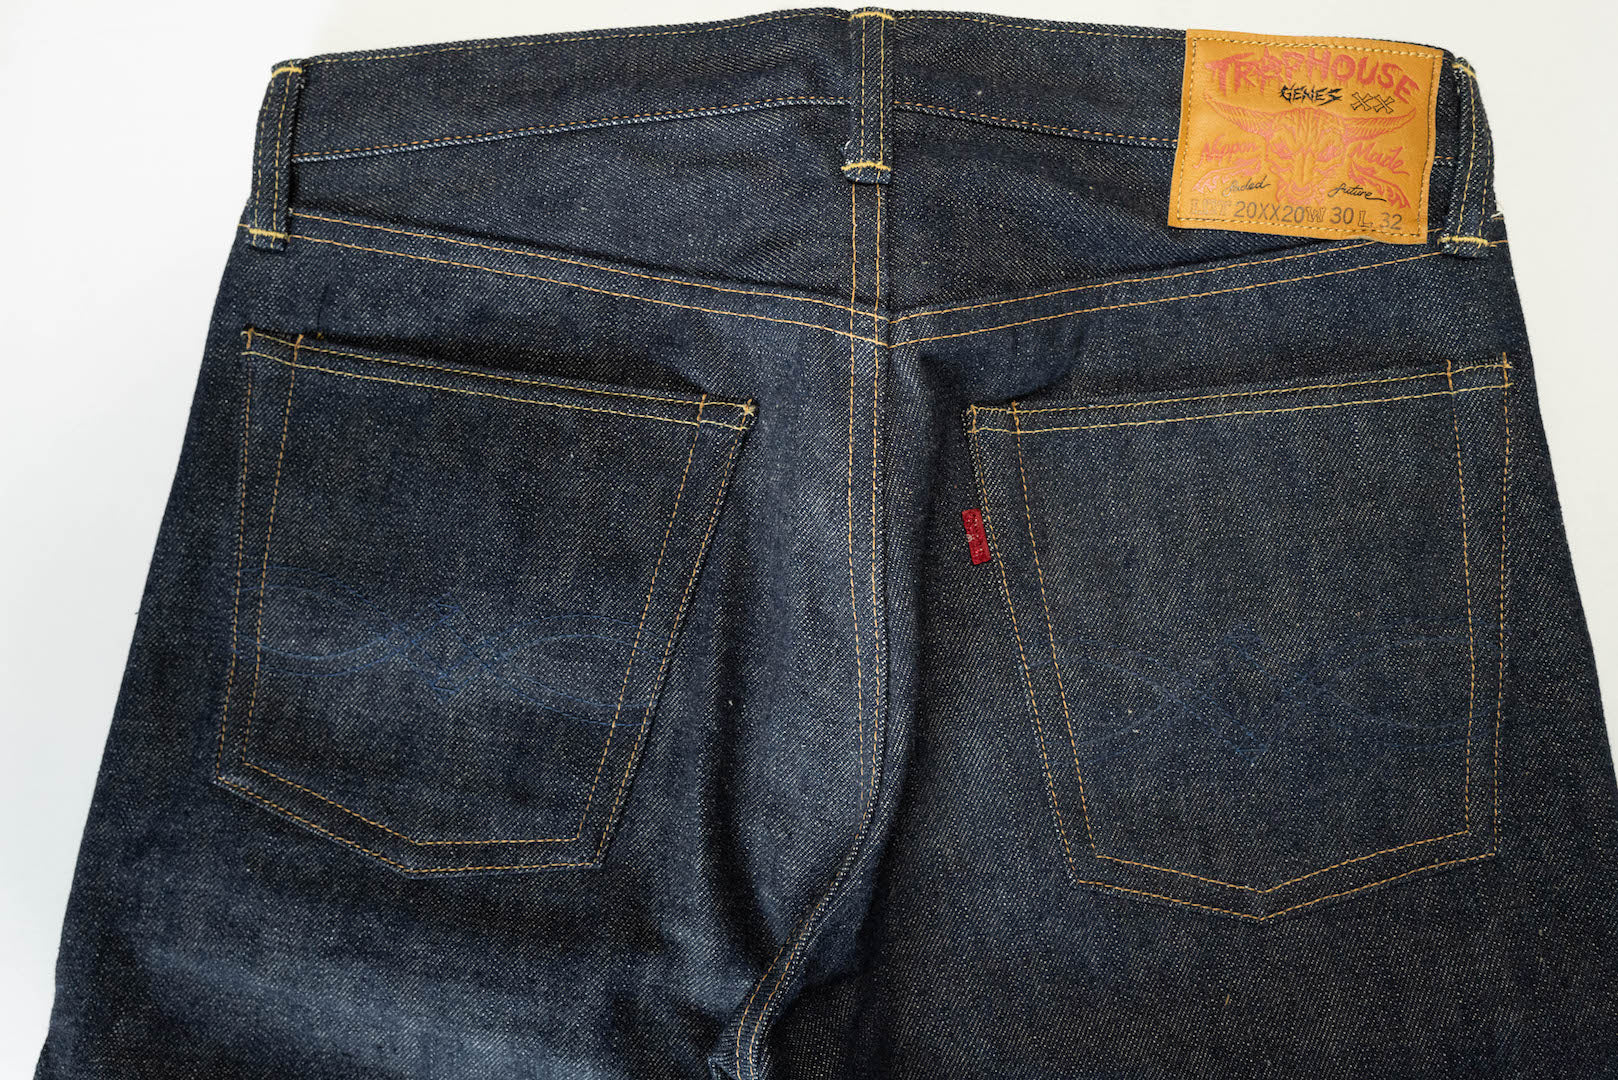 Rockies Jeans. – The Clothing Warehouse